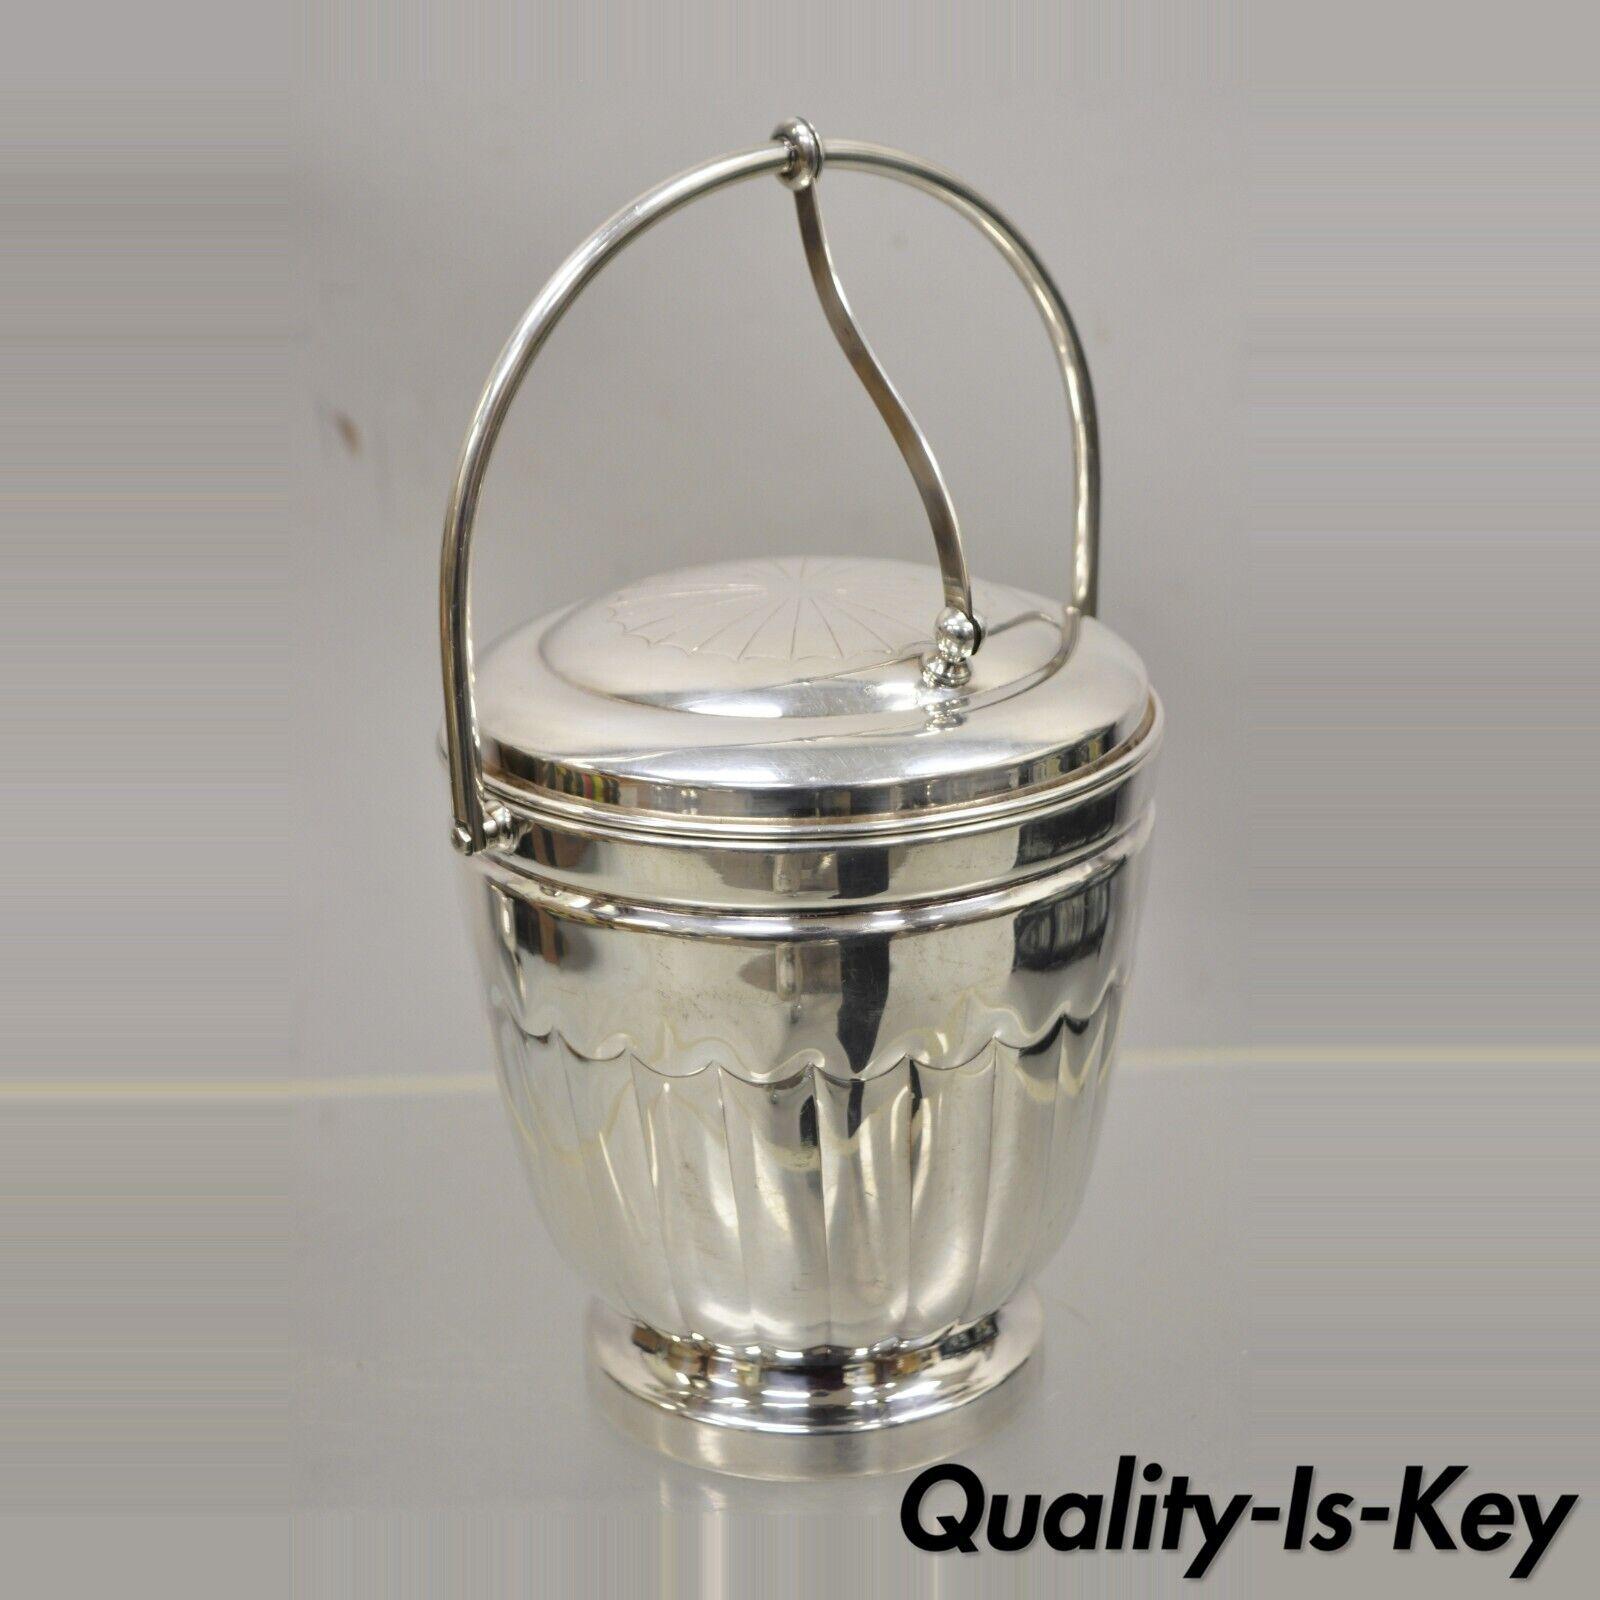 Antique English Regency Silver Plate Ice Bucket with Reticulating Hinge Lid Handle. Item features a mercury glass lined interior, etched tongs to inner lid, lifting lid with reticulated swing handle, crown mark to underside, very nice antique item,